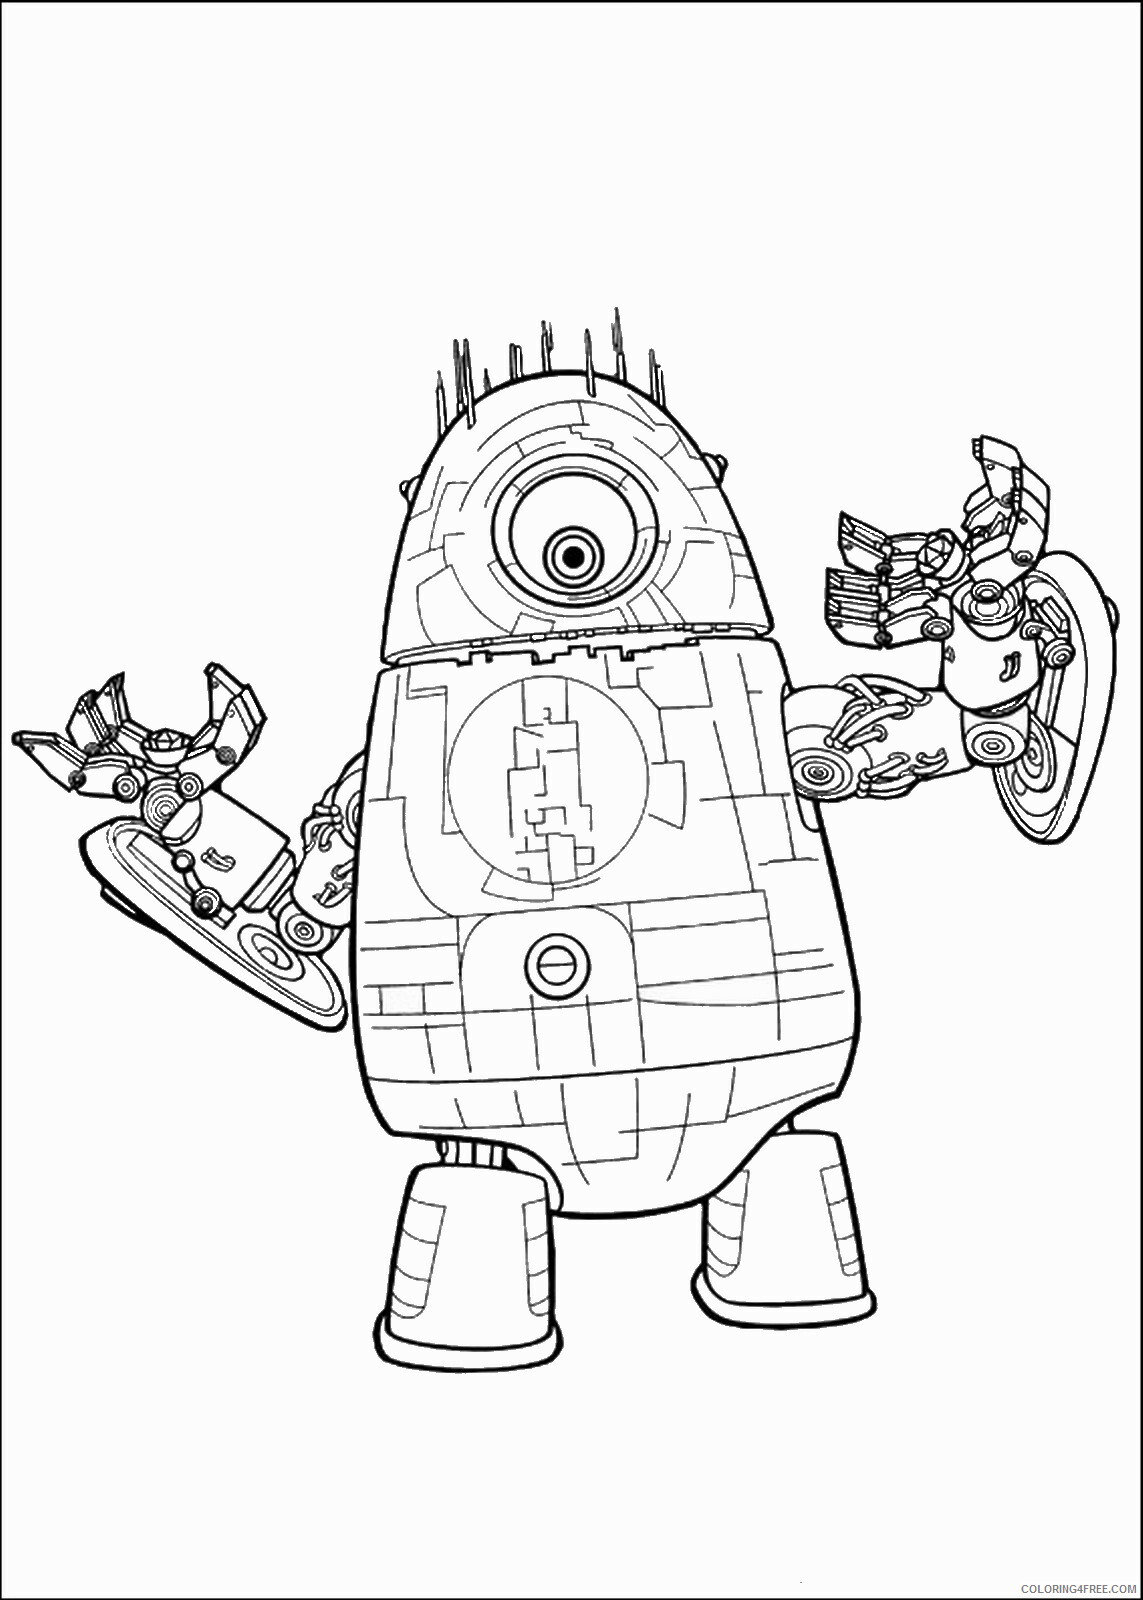 Monsters vs Aliens Coloring Pages TV Film Printable 2020 05337 Coloring4free